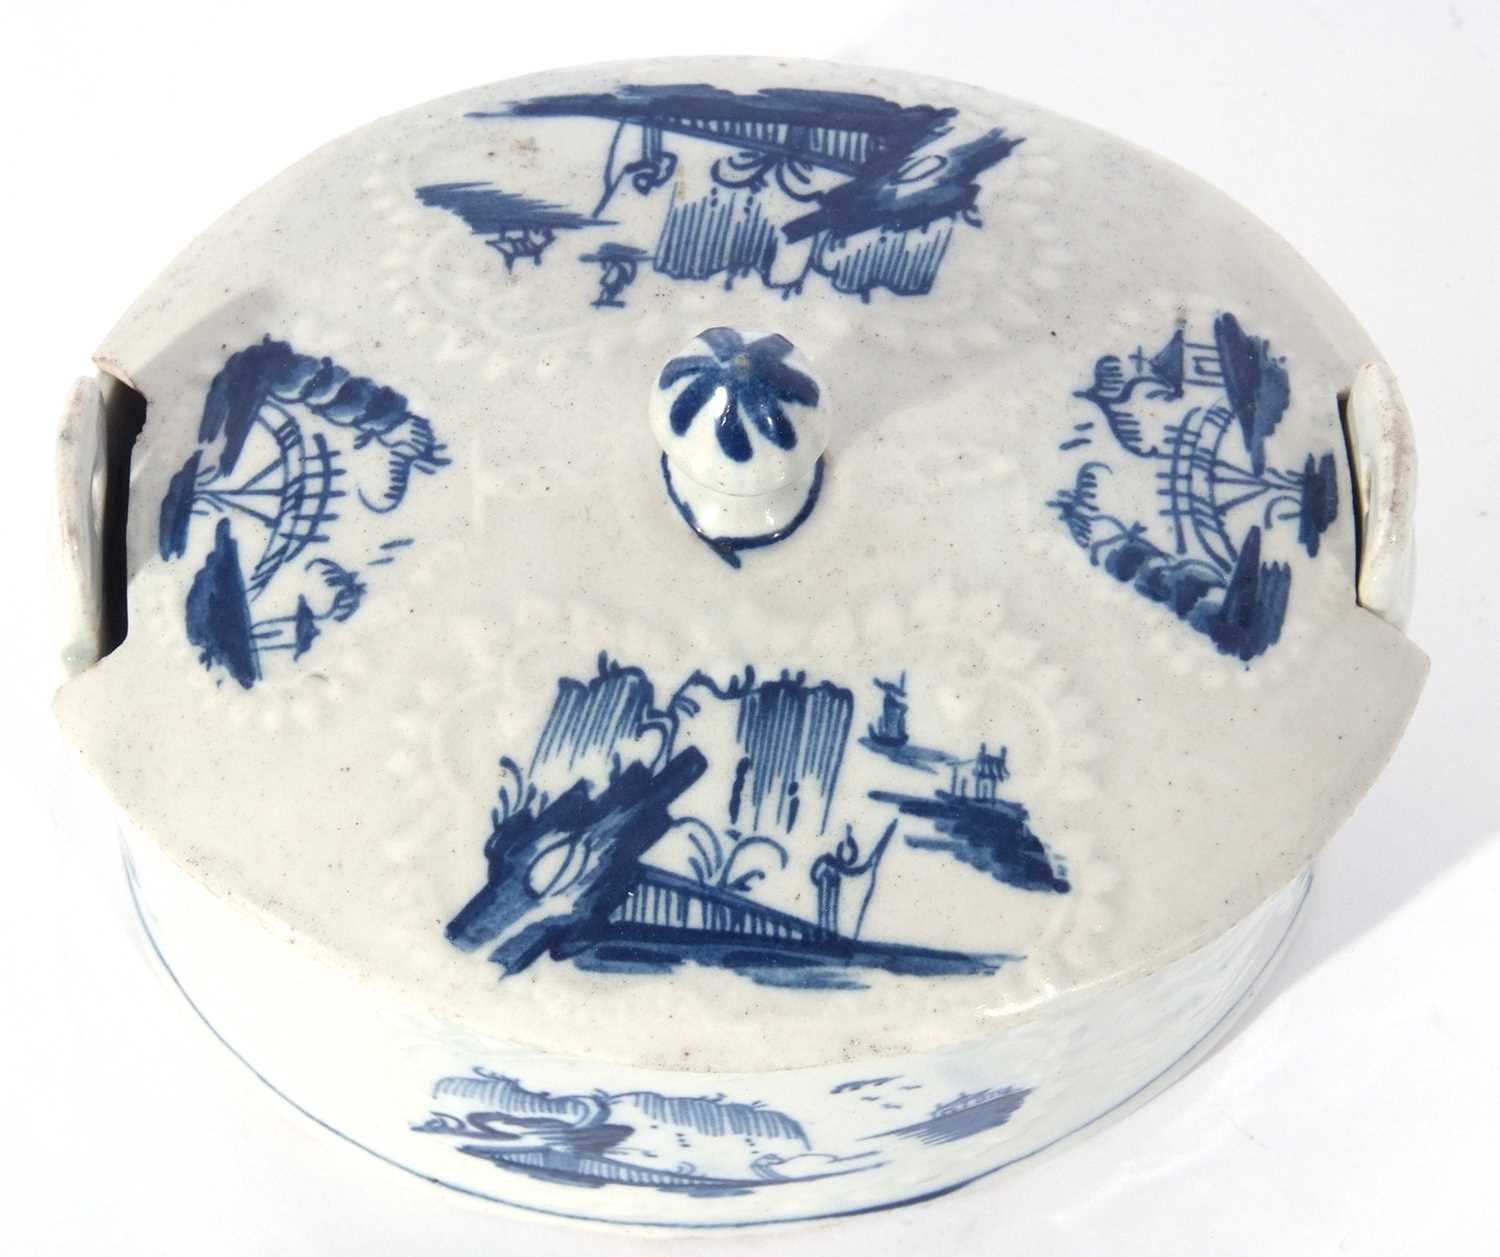 Lowestoft porcelain butter tub, cover and stand circa 1765, the tub moulded with flowers enclosing - Image 11 of 14